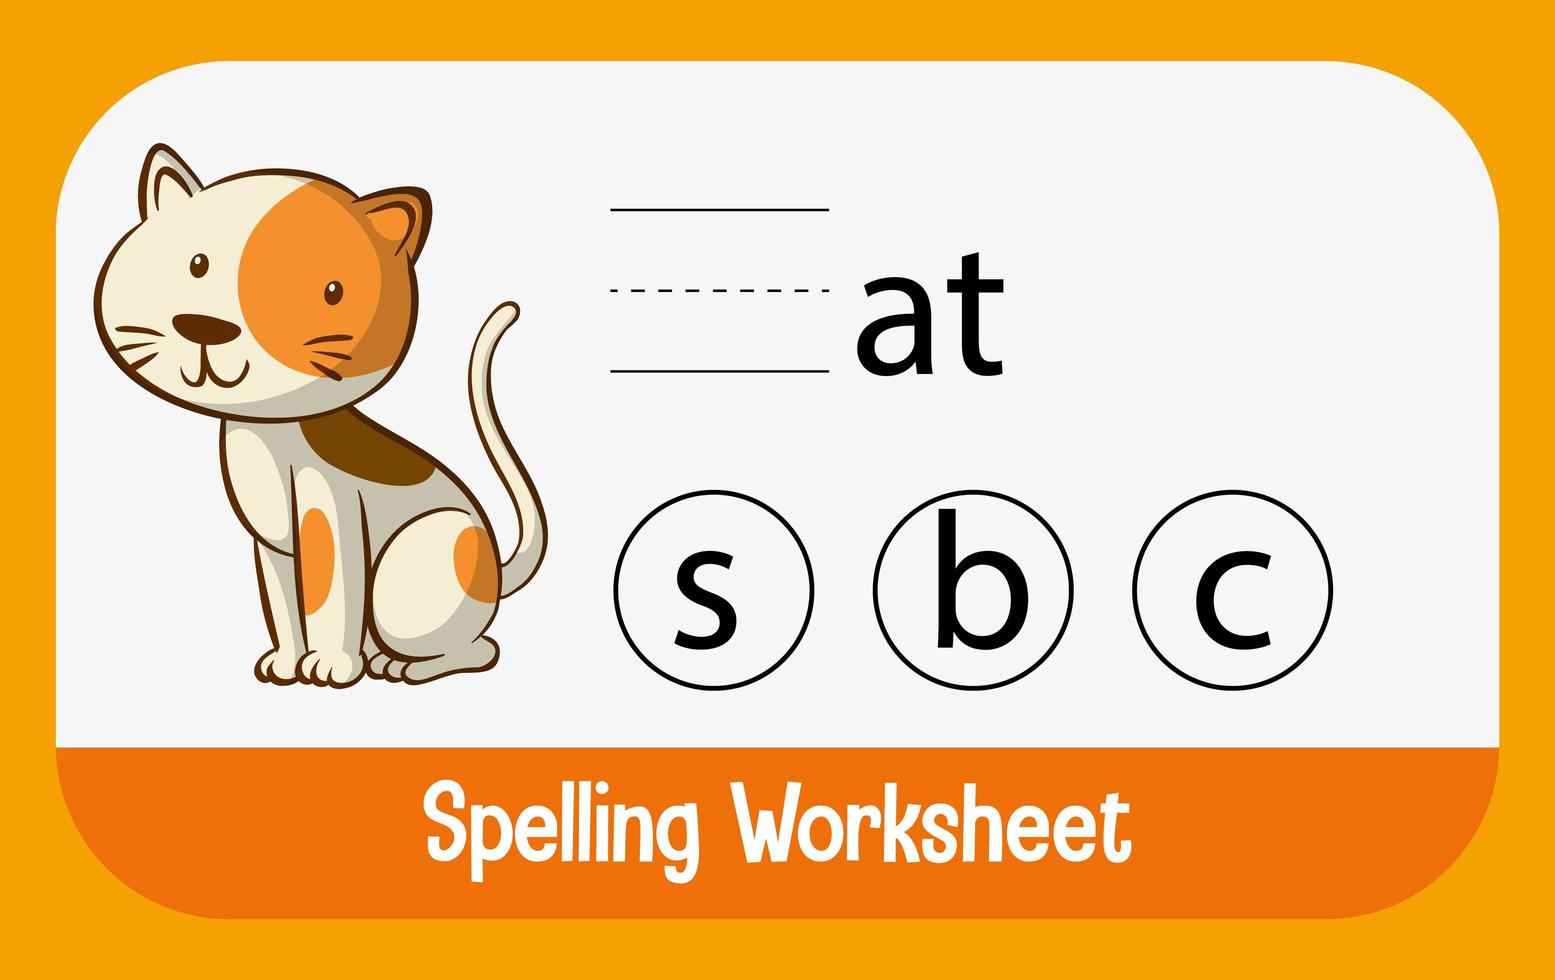 Find missing letter with cat vector